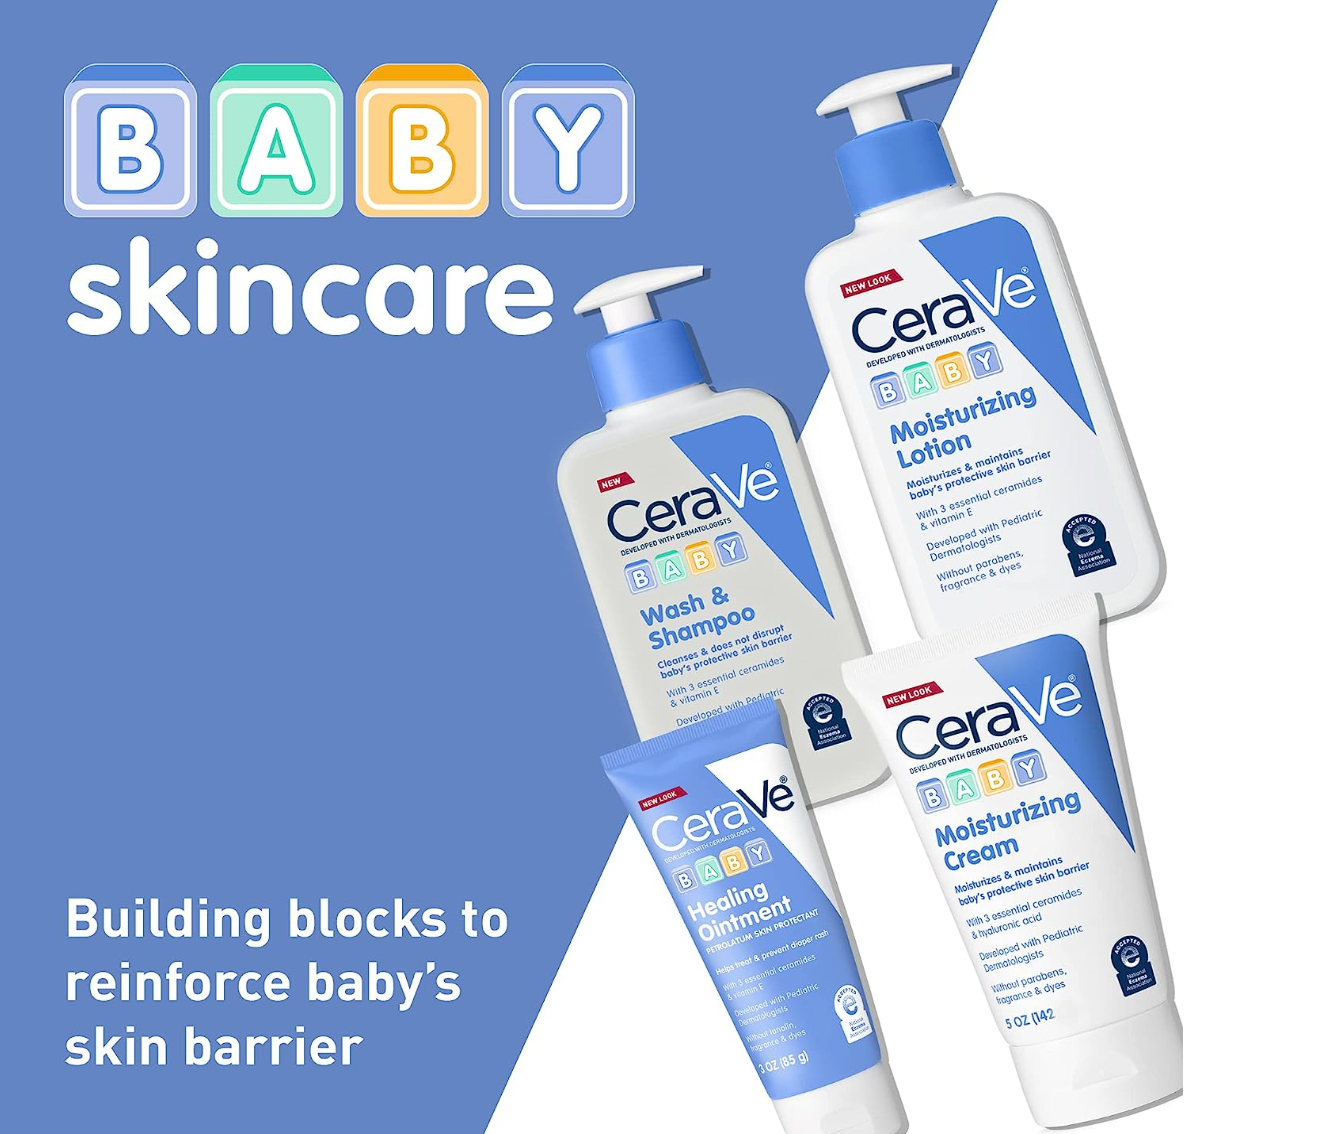 CeraVe Baby Cream | Gentle Moisturizing Cream with Ceramides | Fragrance, Paraben, Dye & Phthalates Free | Rich & Non-Greasy Feel | Gentle Baby Skin Care | 8 Ounce